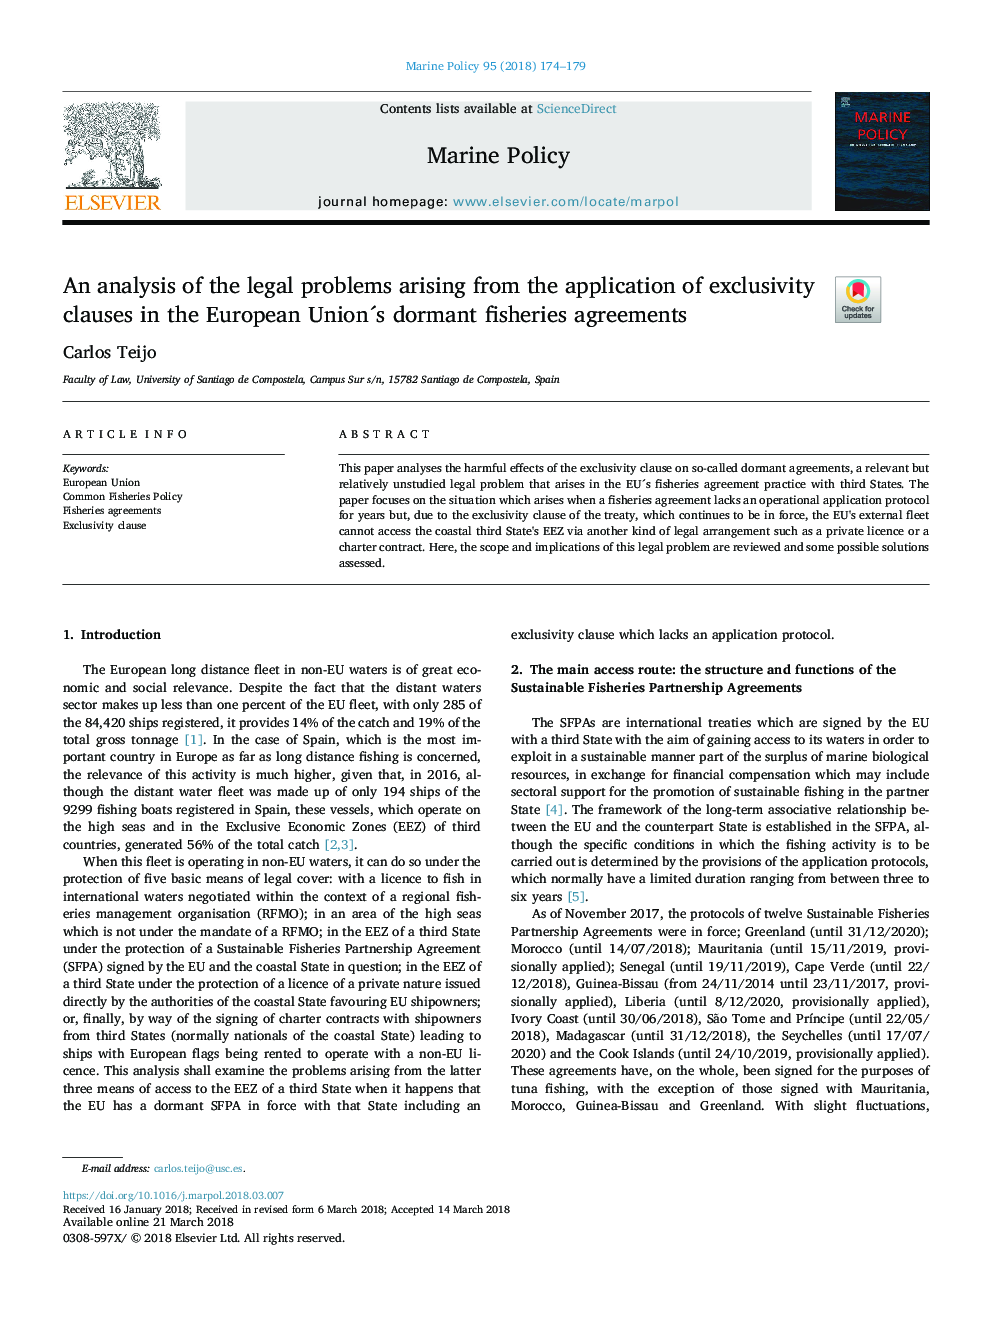 An analysis of the legal problems arising from the application of exclusivity clauses in the European UnionÂ´s dormant fisheries agreements